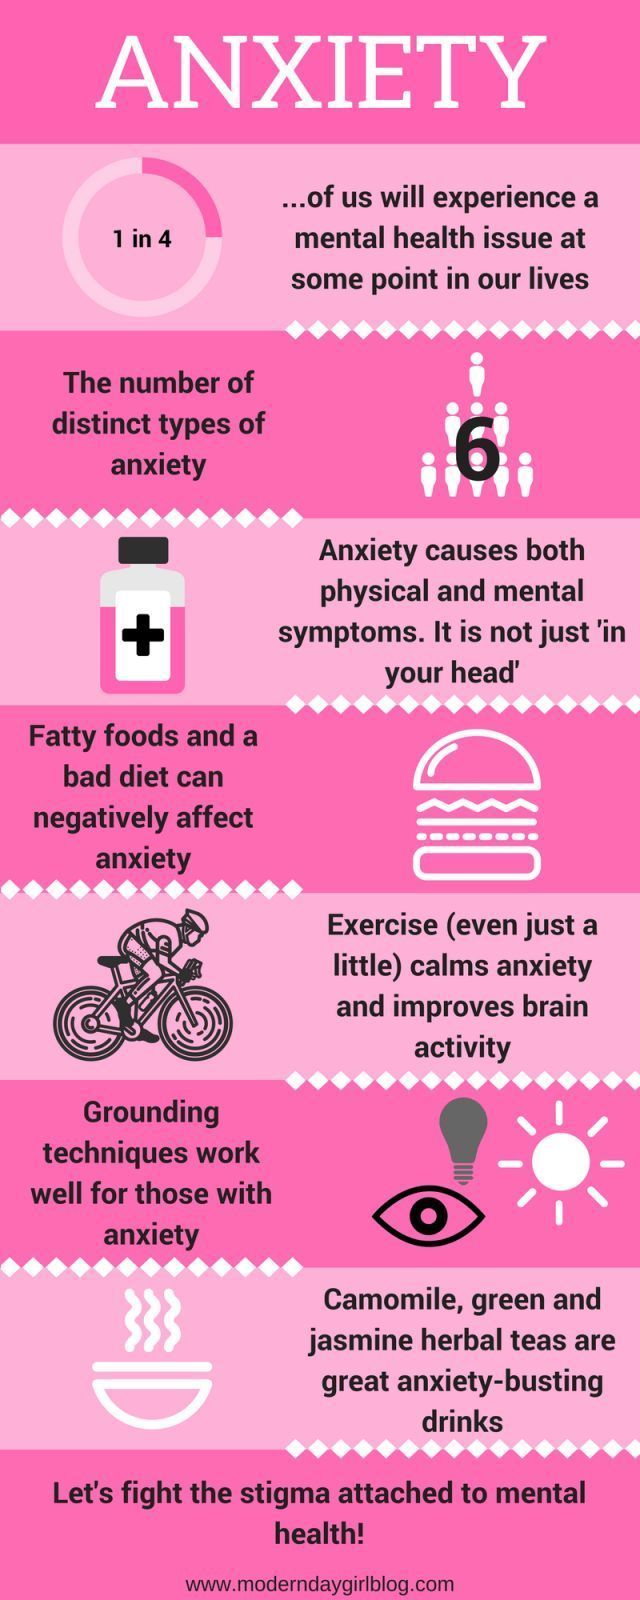 Here’s an infographic which shows visually how anxiety affects us all. It includes simple tips and ways to deal with anxiety.